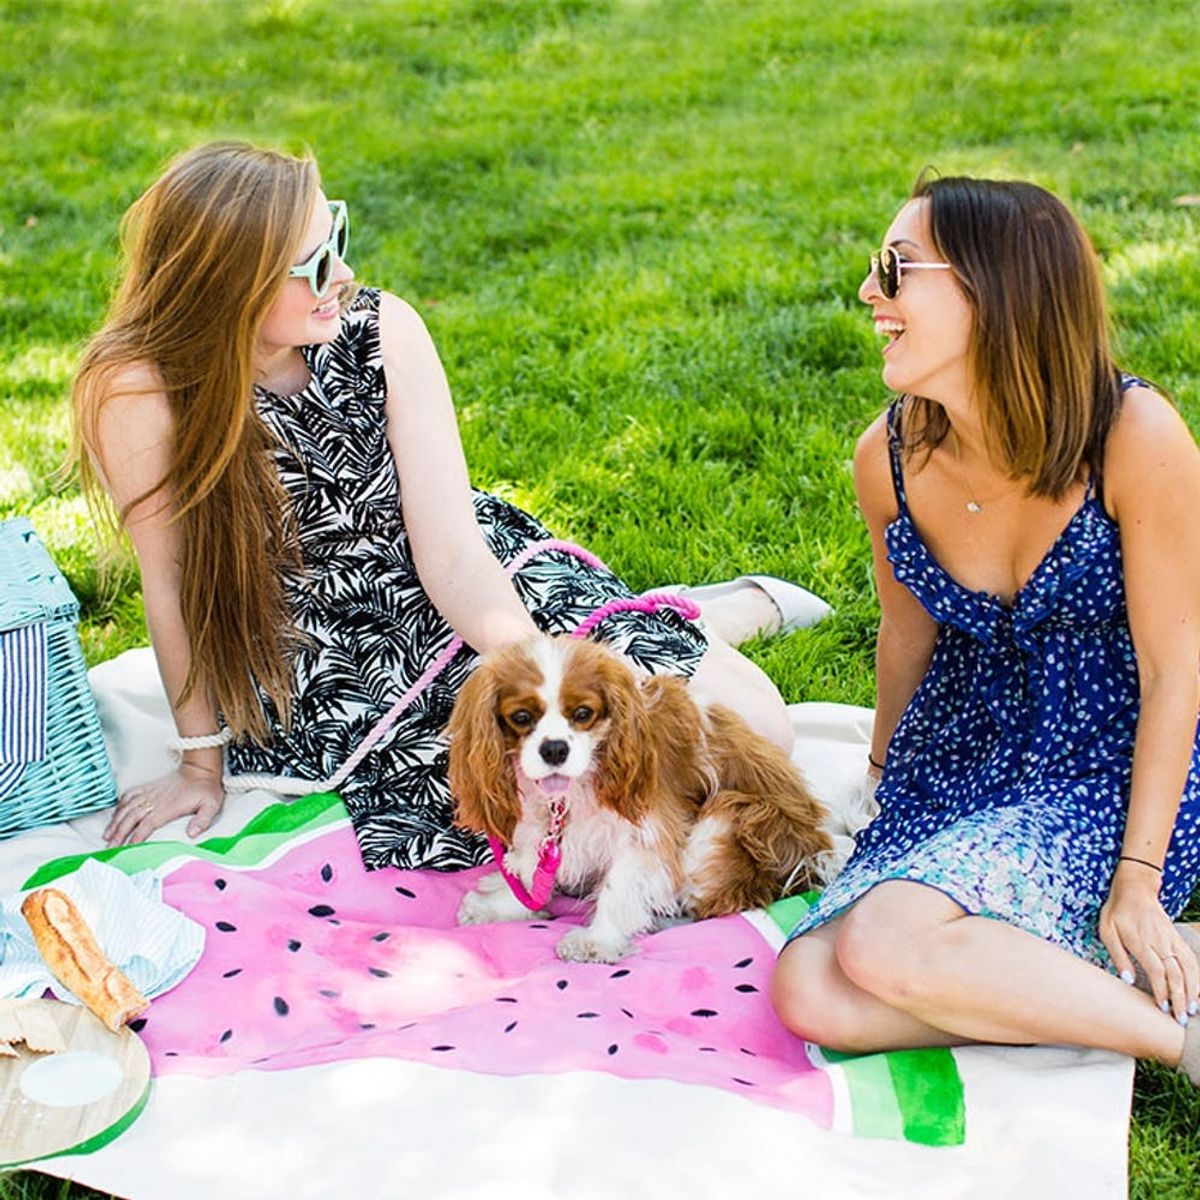 How to Make Picnic Blankets Out of Drop Cloths